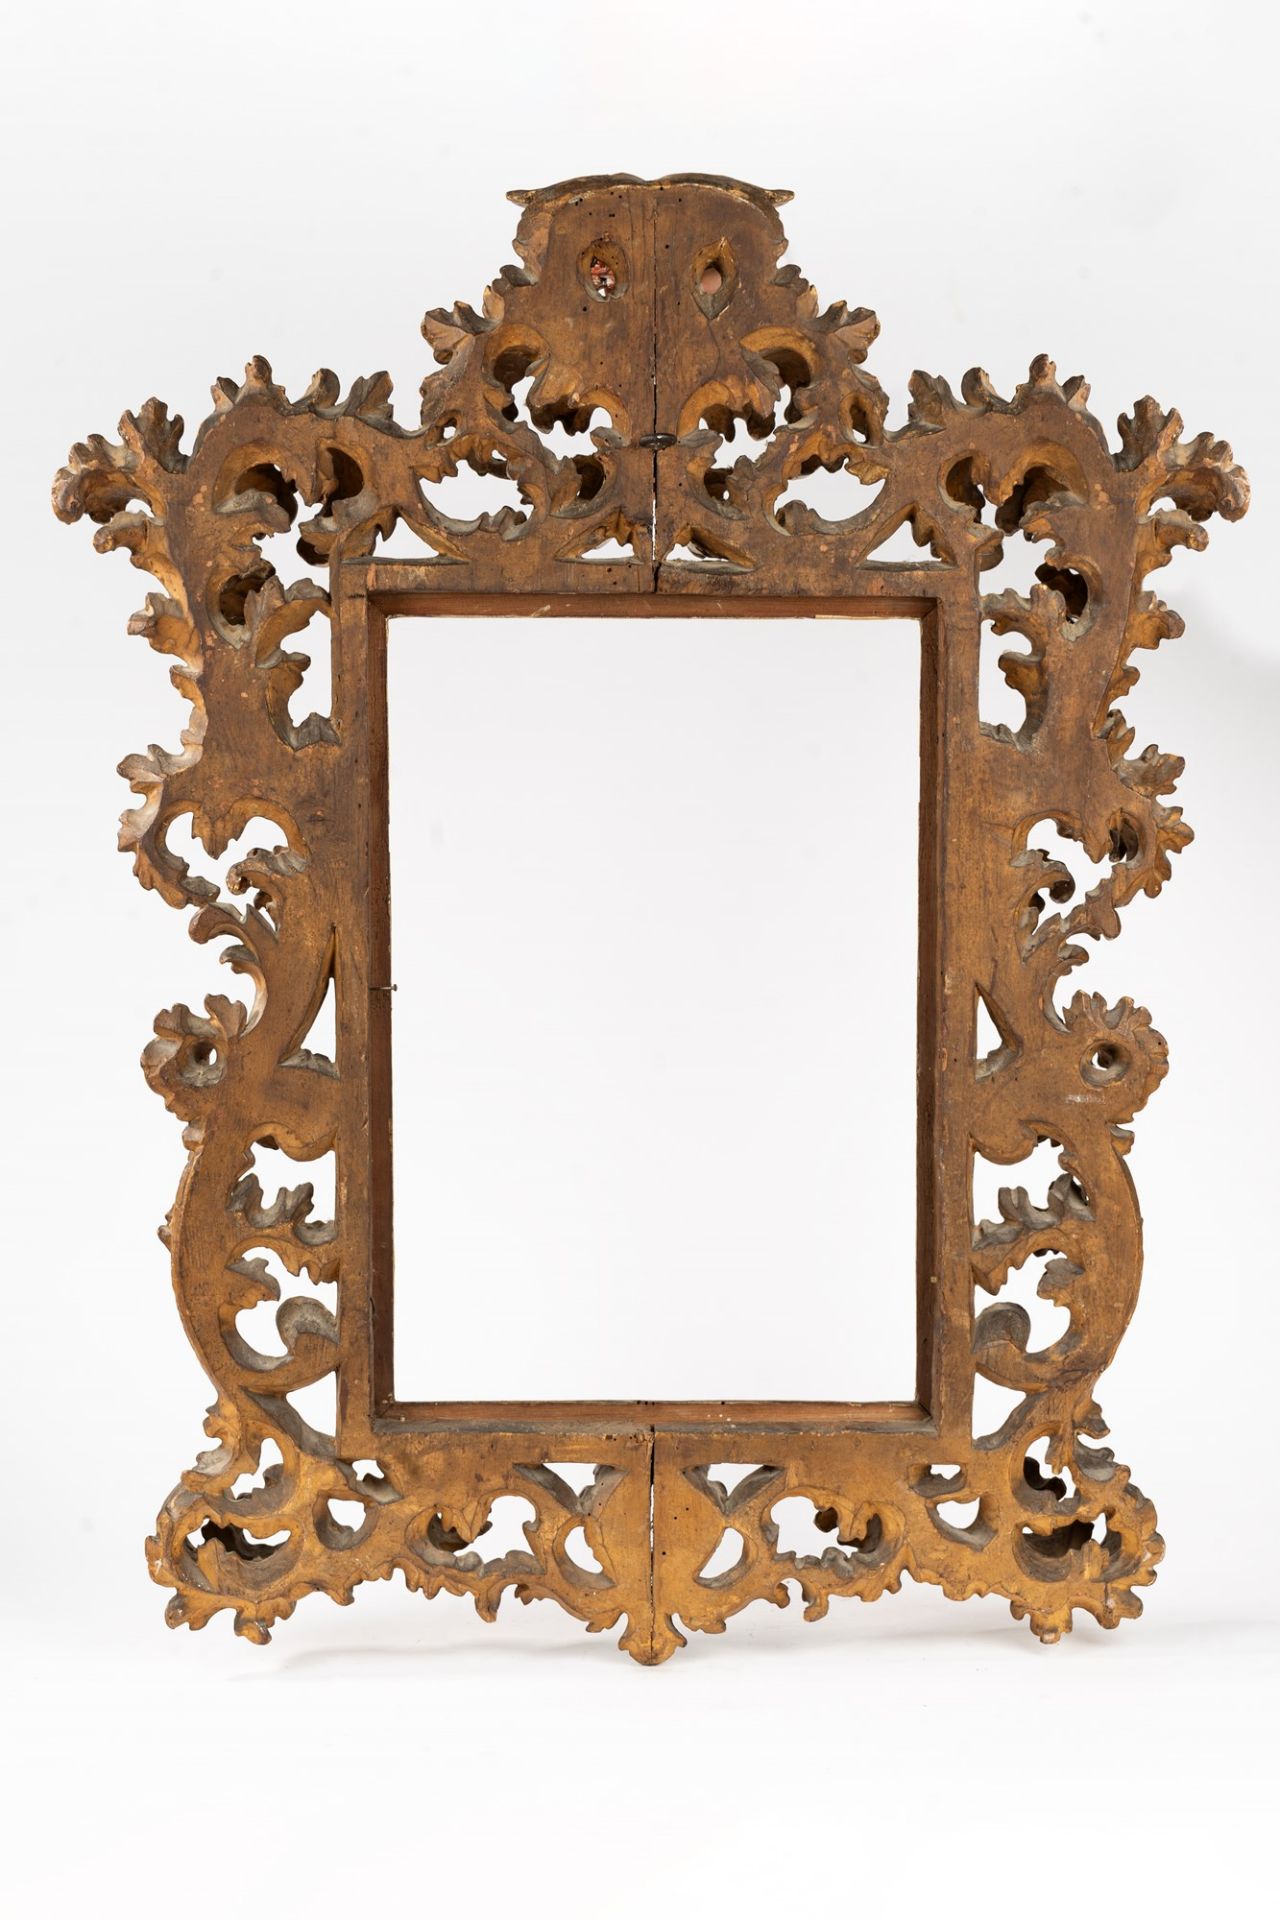 Carved and gilded wood frame, 19th century - Image 2 of 7